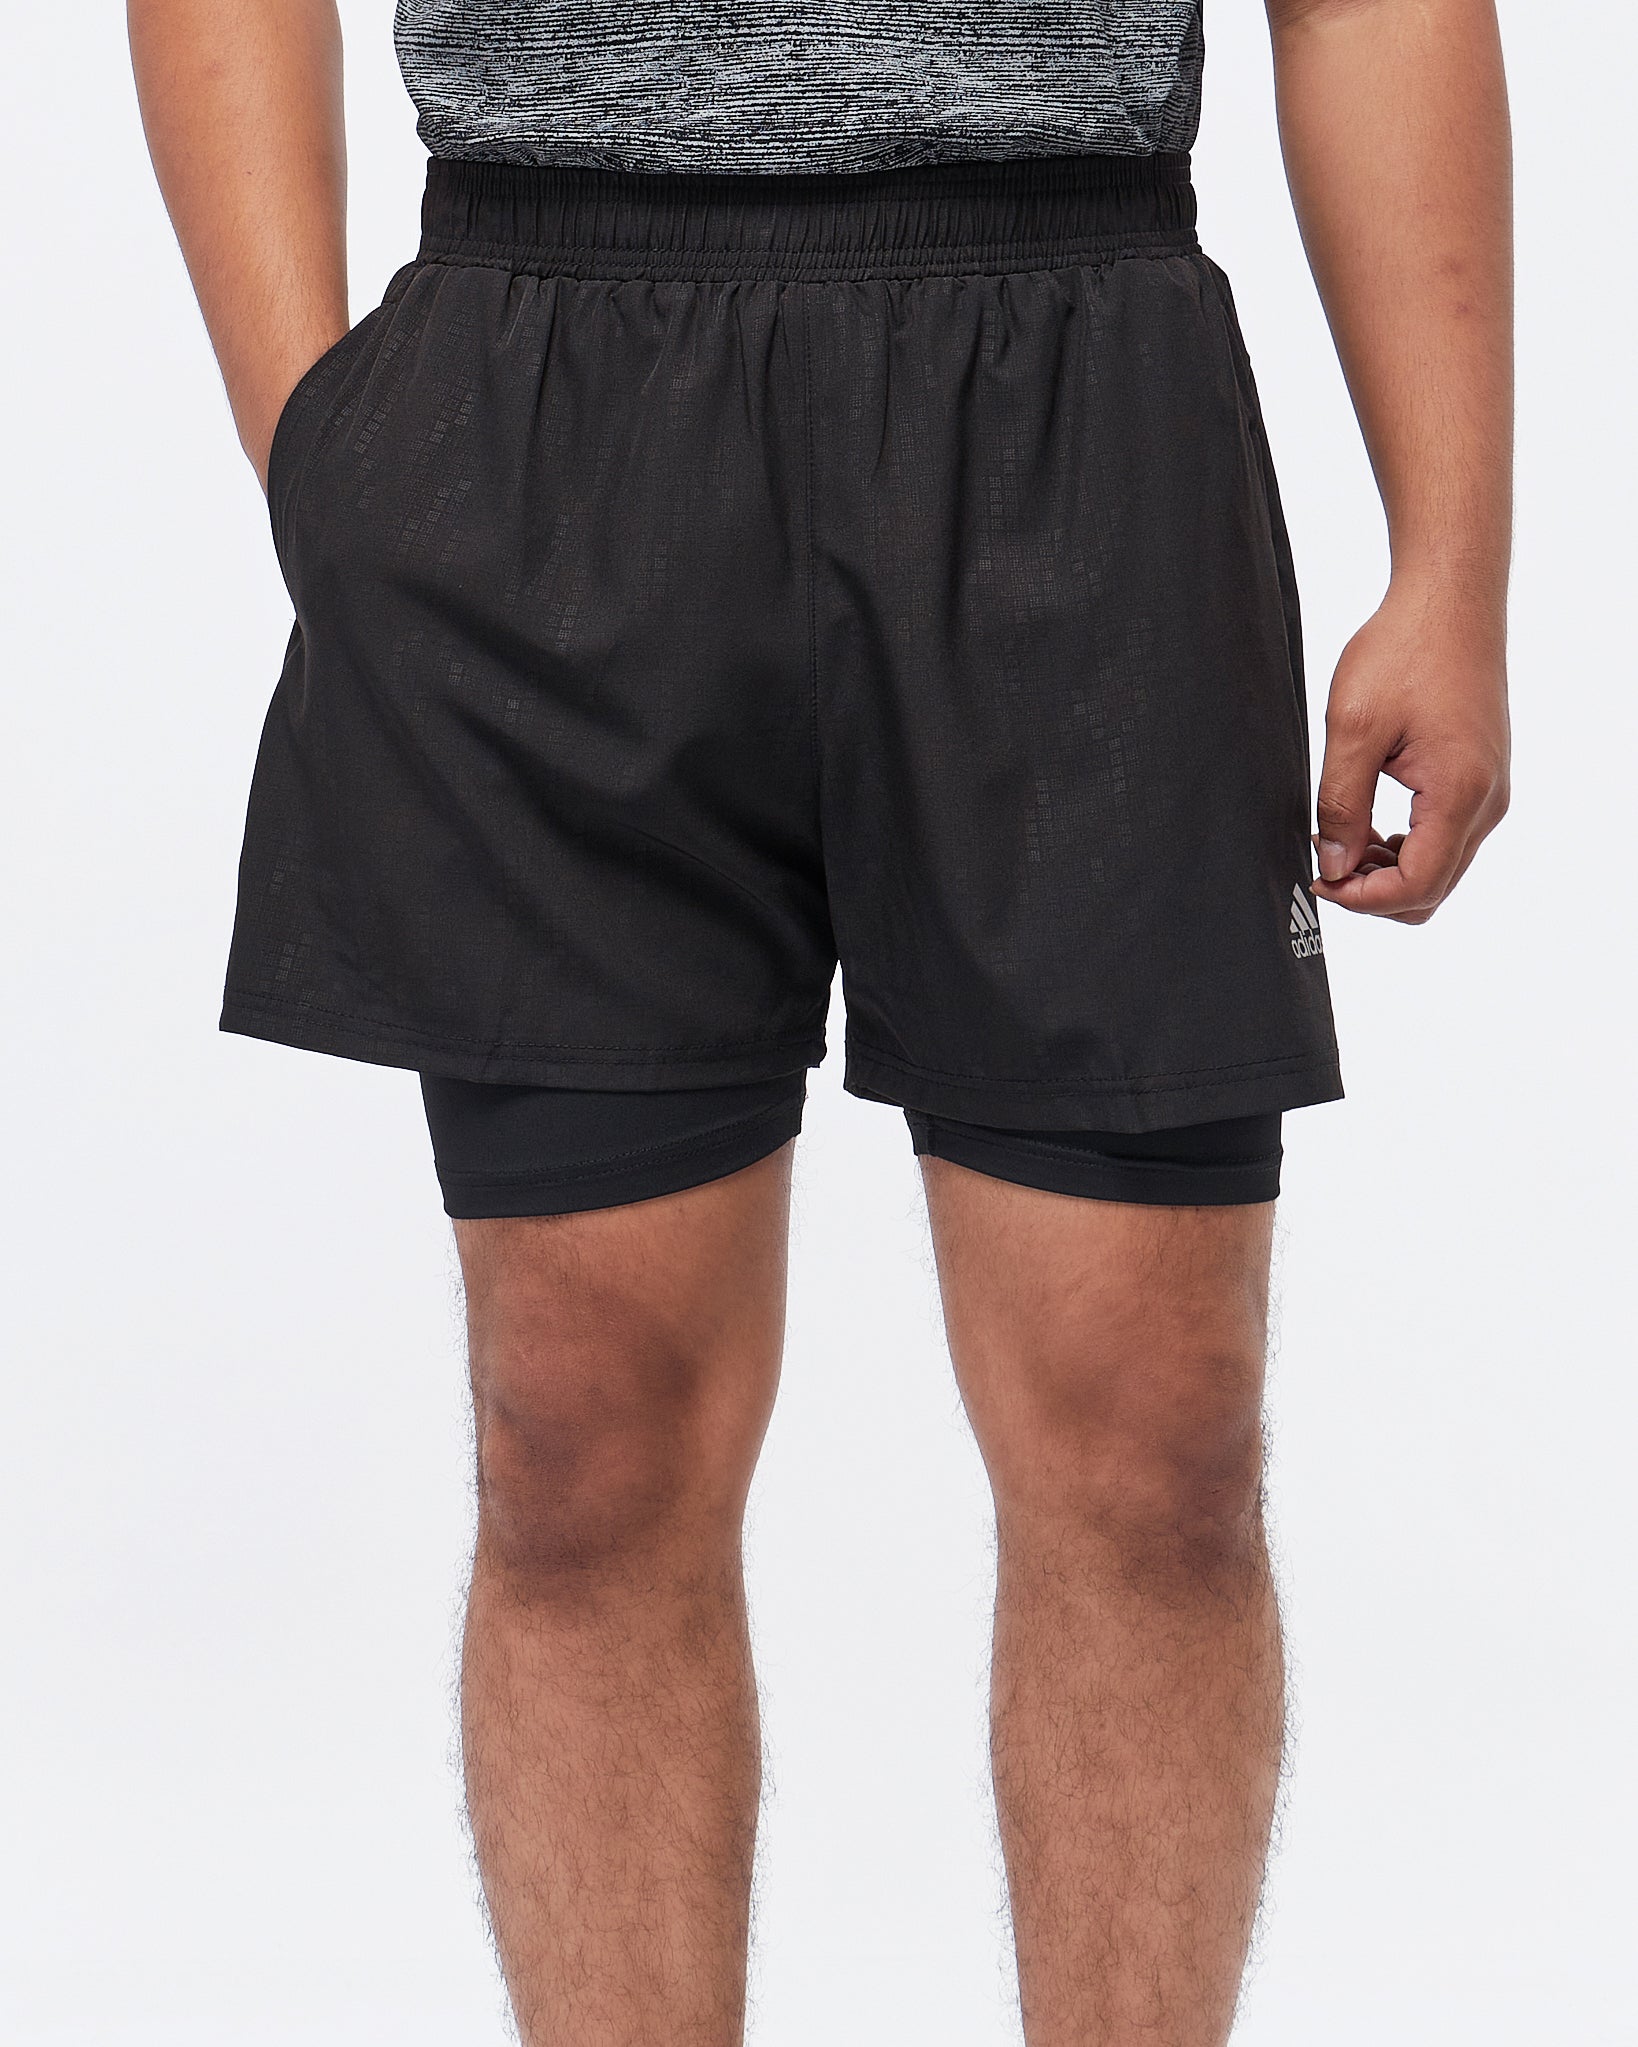 MOI OUTFIT-AD Sdie Striped 2 in 1 Men Sport Shorts 14.50